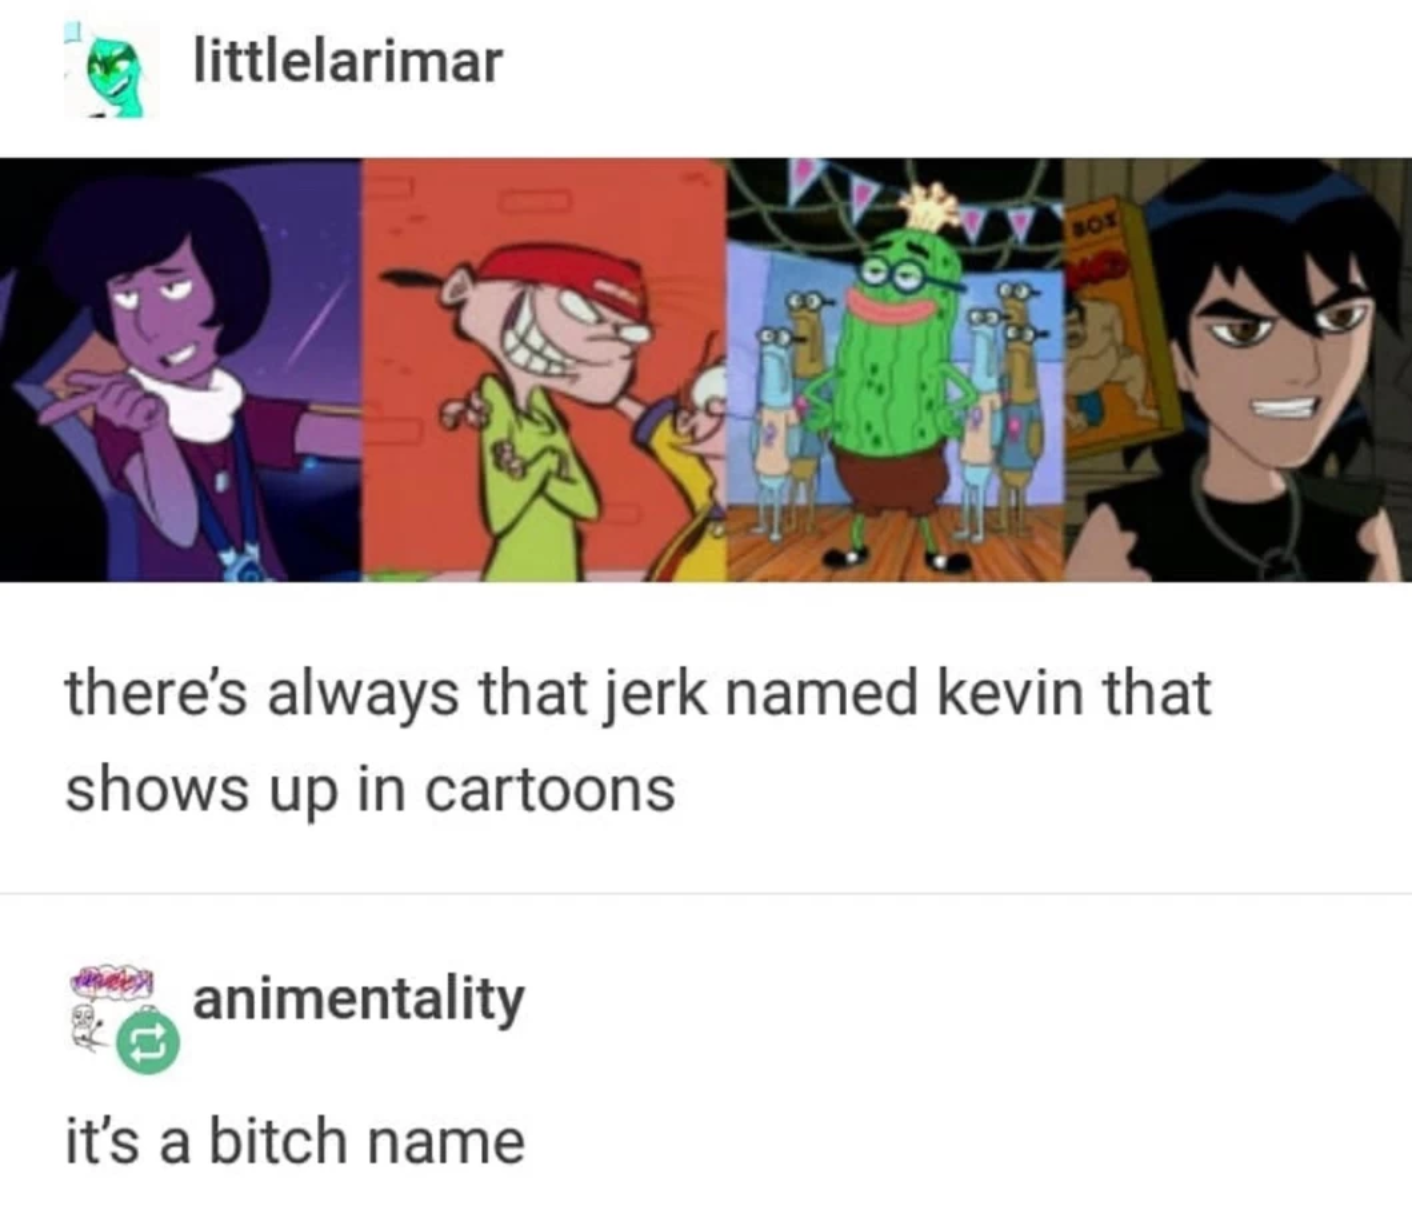 cartoon kevin meme - littlelarimar co there's always that jerk named kevin that shows up in cartoons en animentality 6 it's a bitch name